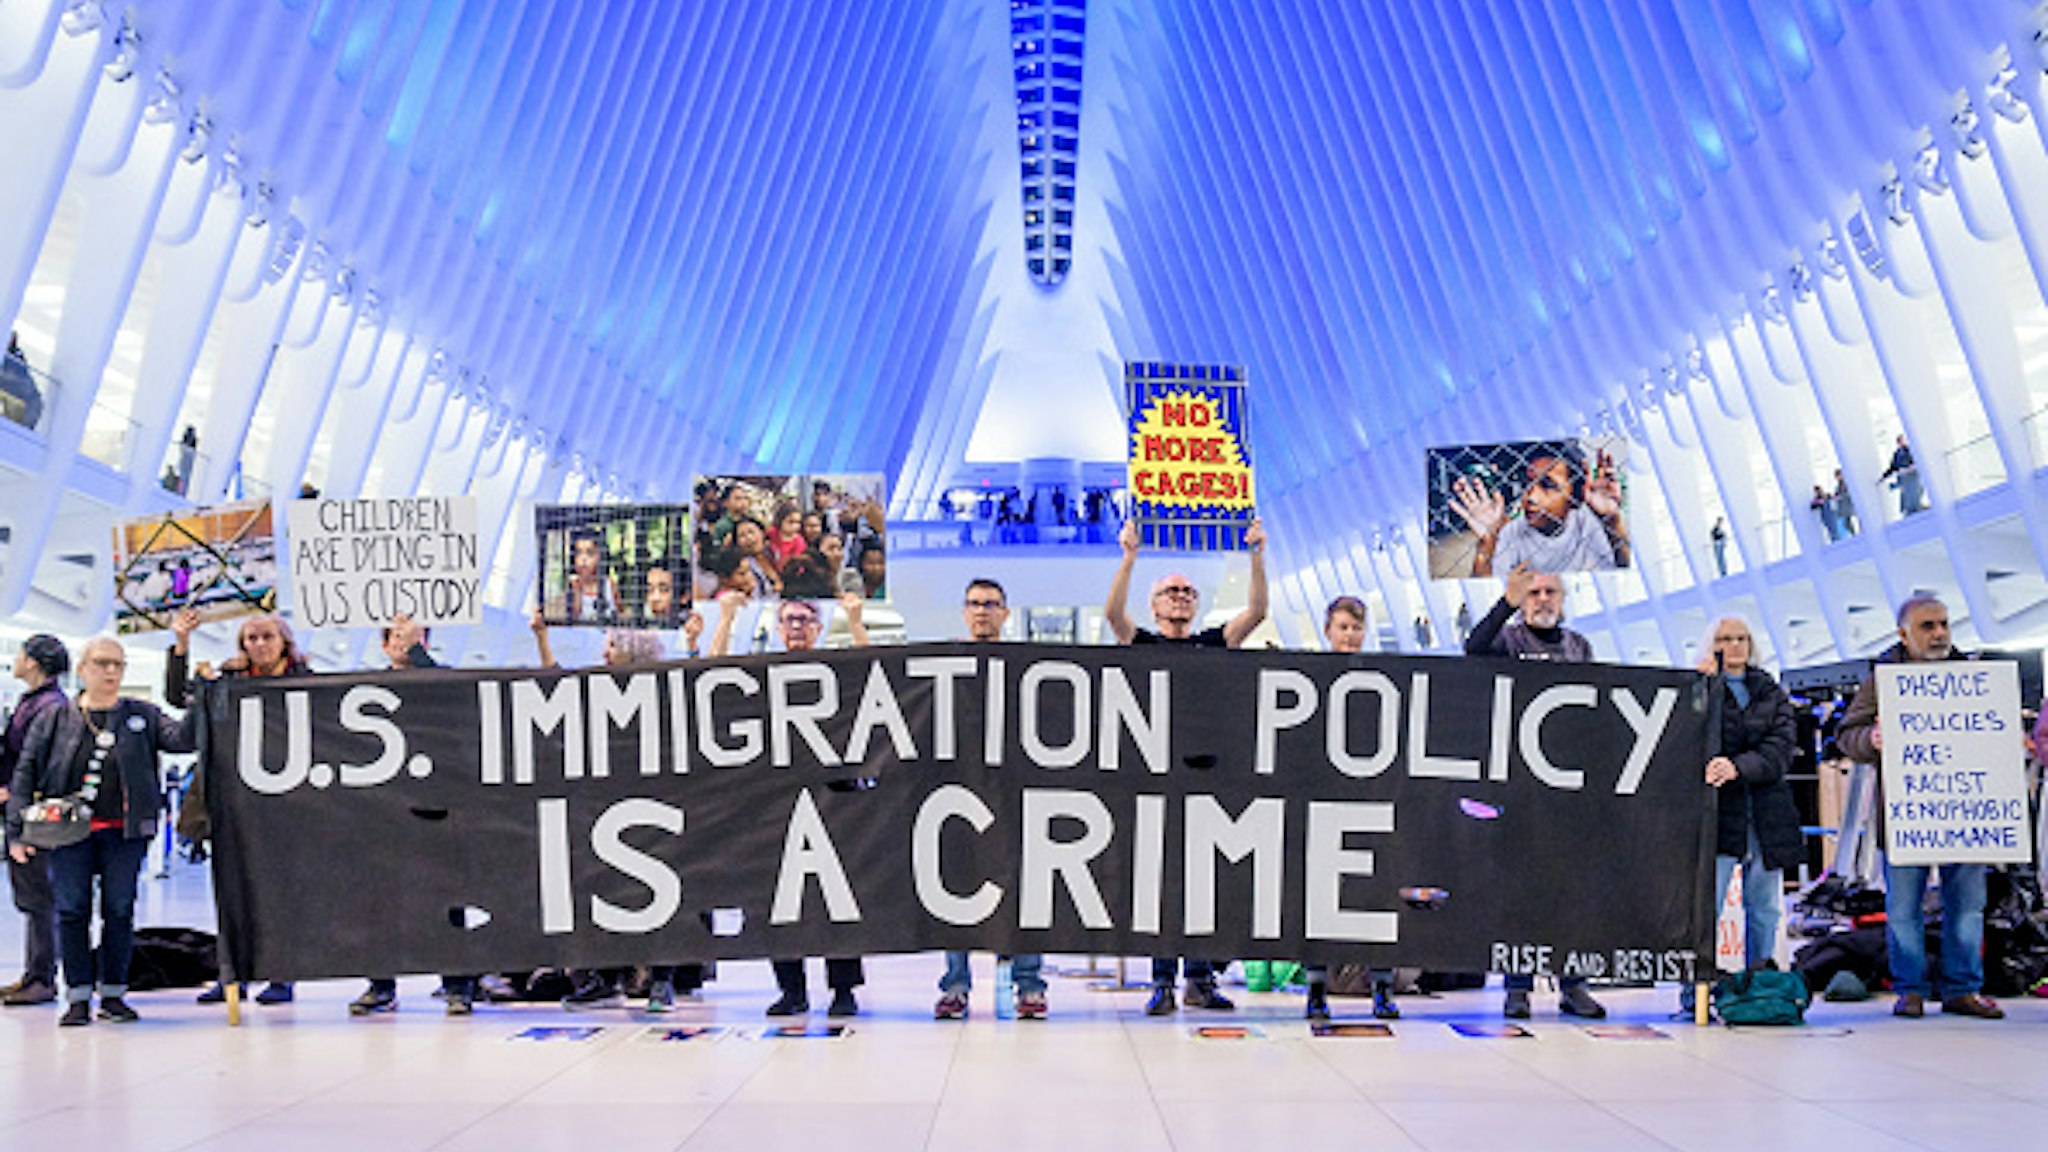 MANHATTAN, NEW YORK, UNITED STATES - 2020/01/06: Protesters holding a banner at the silent protest. Members of the activist group Rise And Resist gathered a silent protest inside The Oculus at the World Trade Center, holding protest signs, a banner reading "U.S. Immigration Policy Is A Crime", photographs of the children who have died in ICE custody, and photographs of the detention camps to object to Border Patrol and ICE treatment of immigrants, refugees, and asylum seekers, calling on the Trump administration to immediately process all asylum seekers.